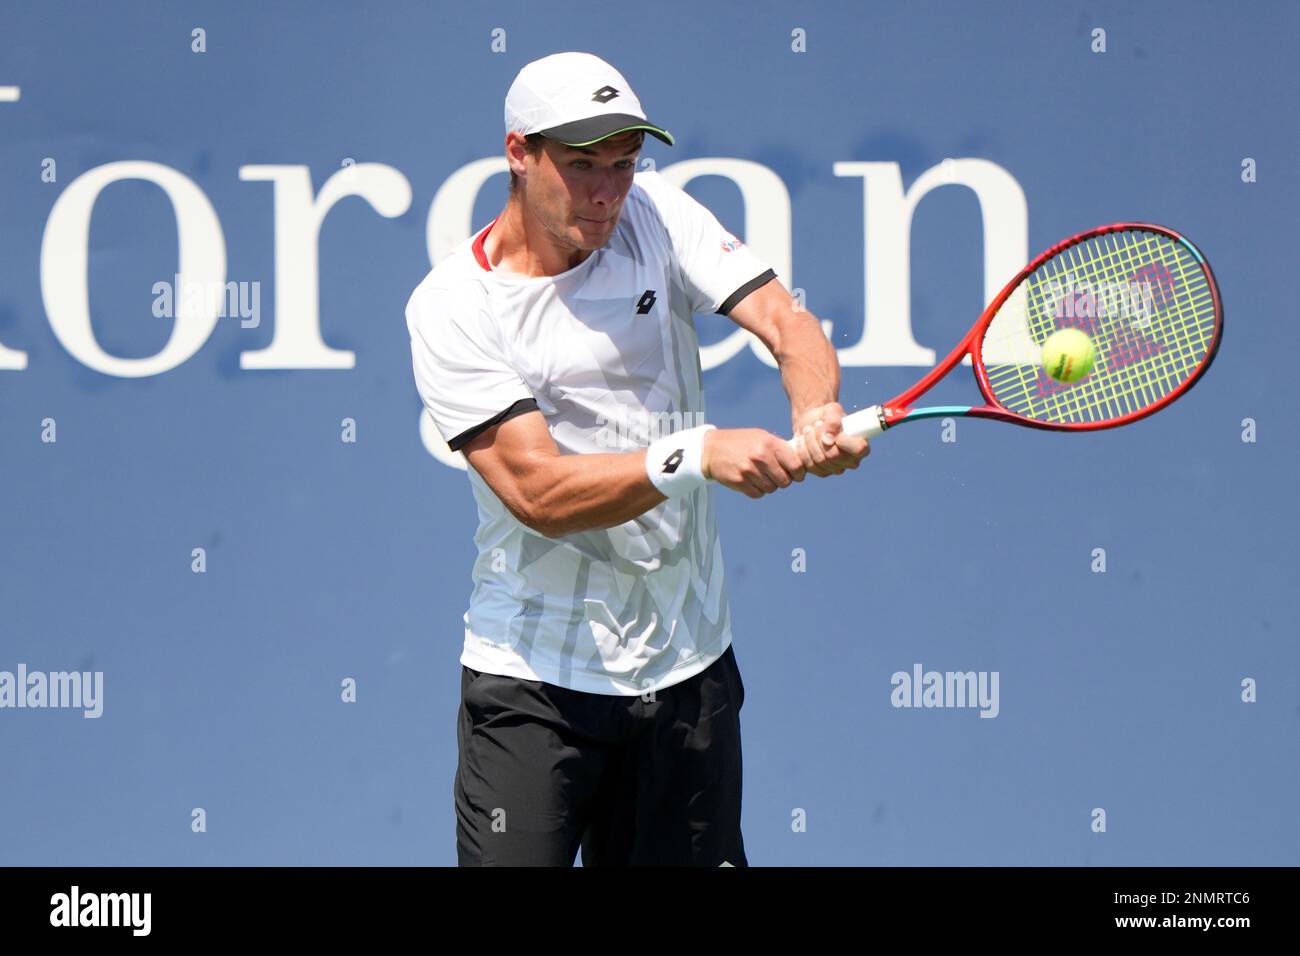 Kamil Majchrzak in action during a qualifying match at the 2021 US Open, Friday, Aug